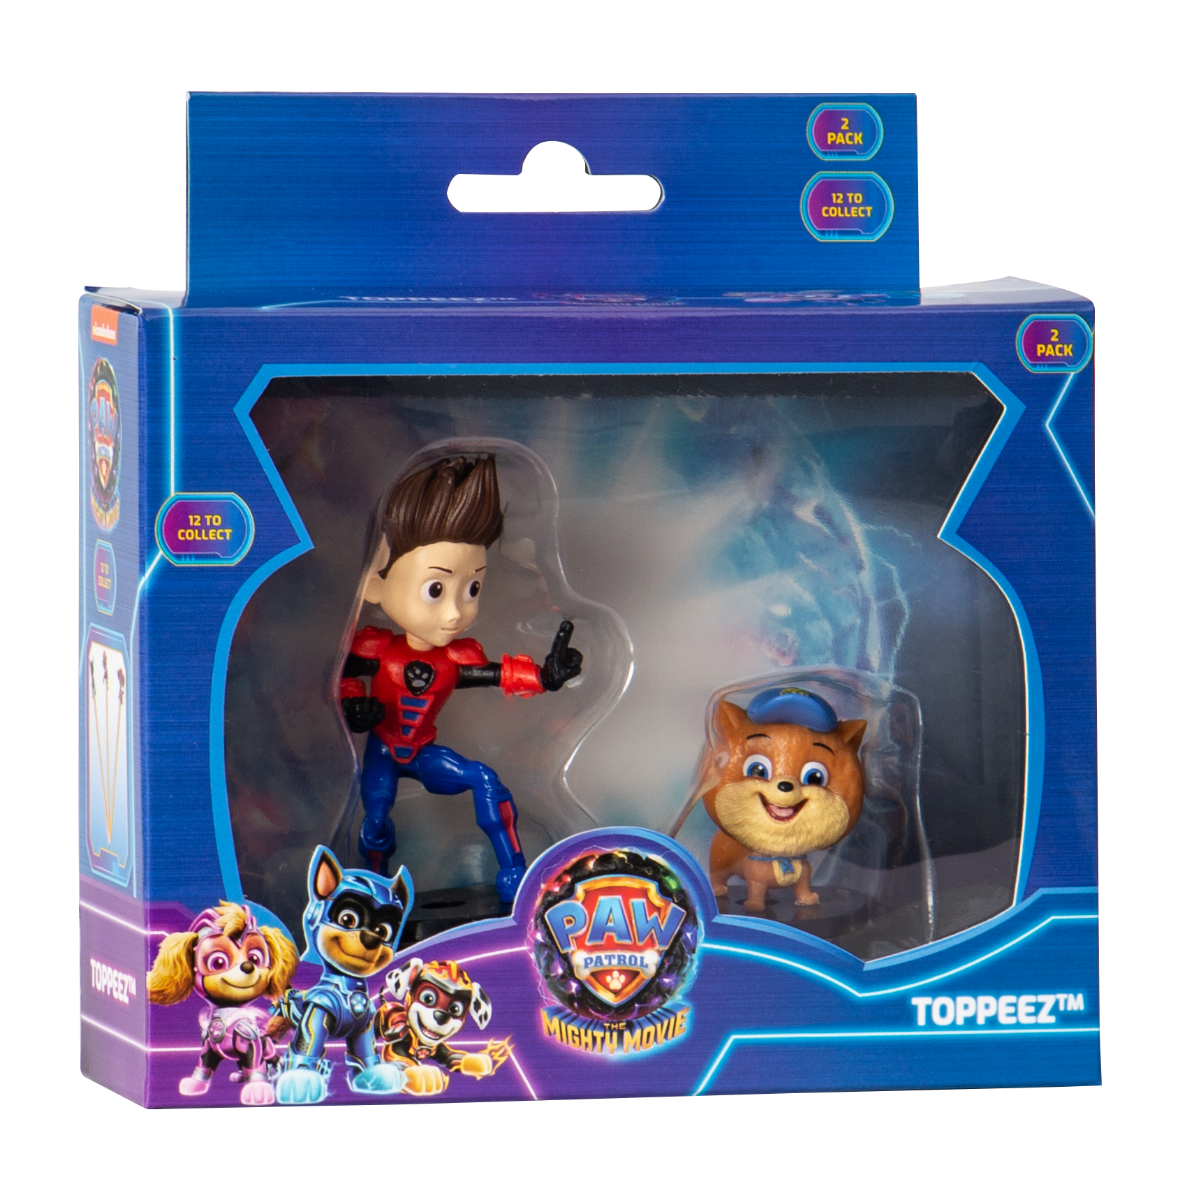 Paw Patrol: The Mighty Movie Pencil Toppers - Pack of 2  (Assorted)